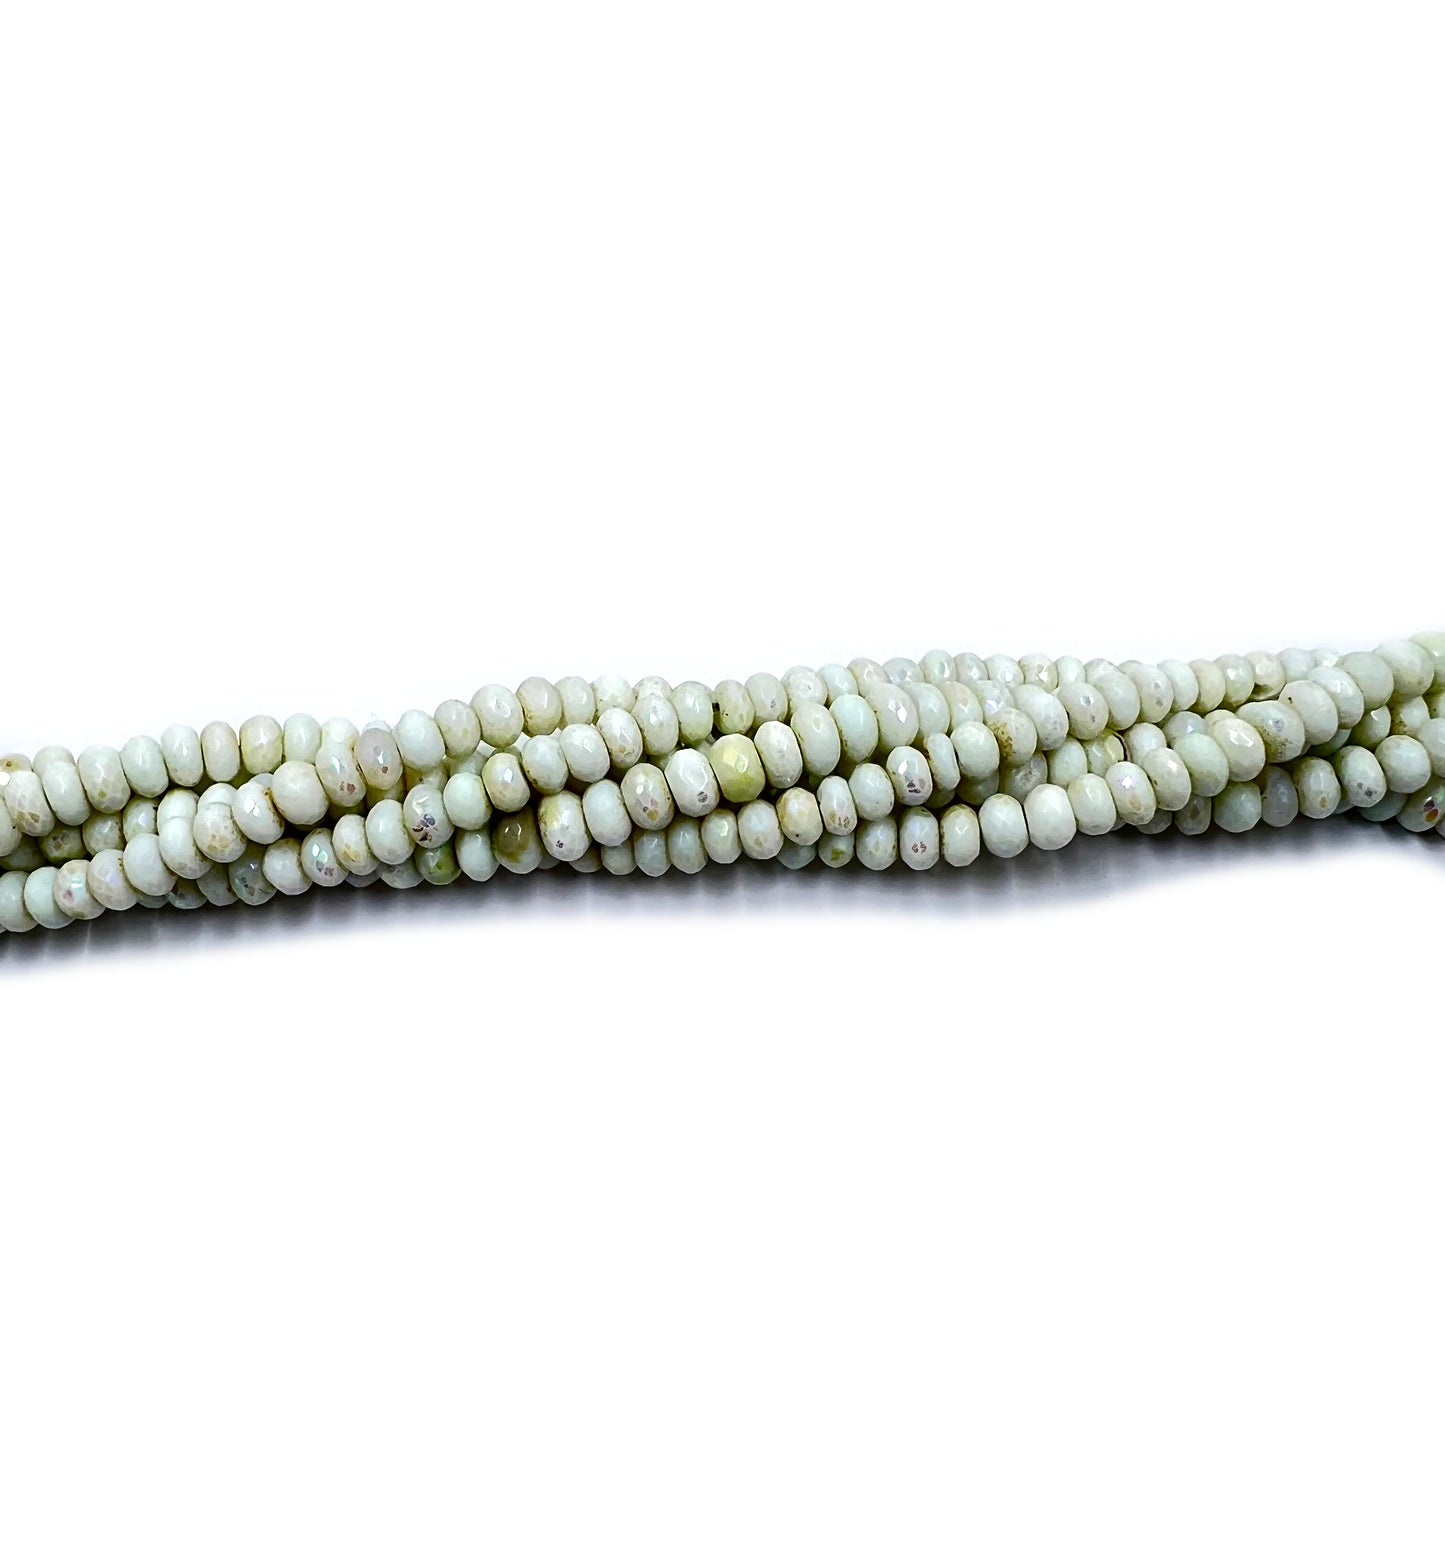 Treated Opal Rondelle Beads